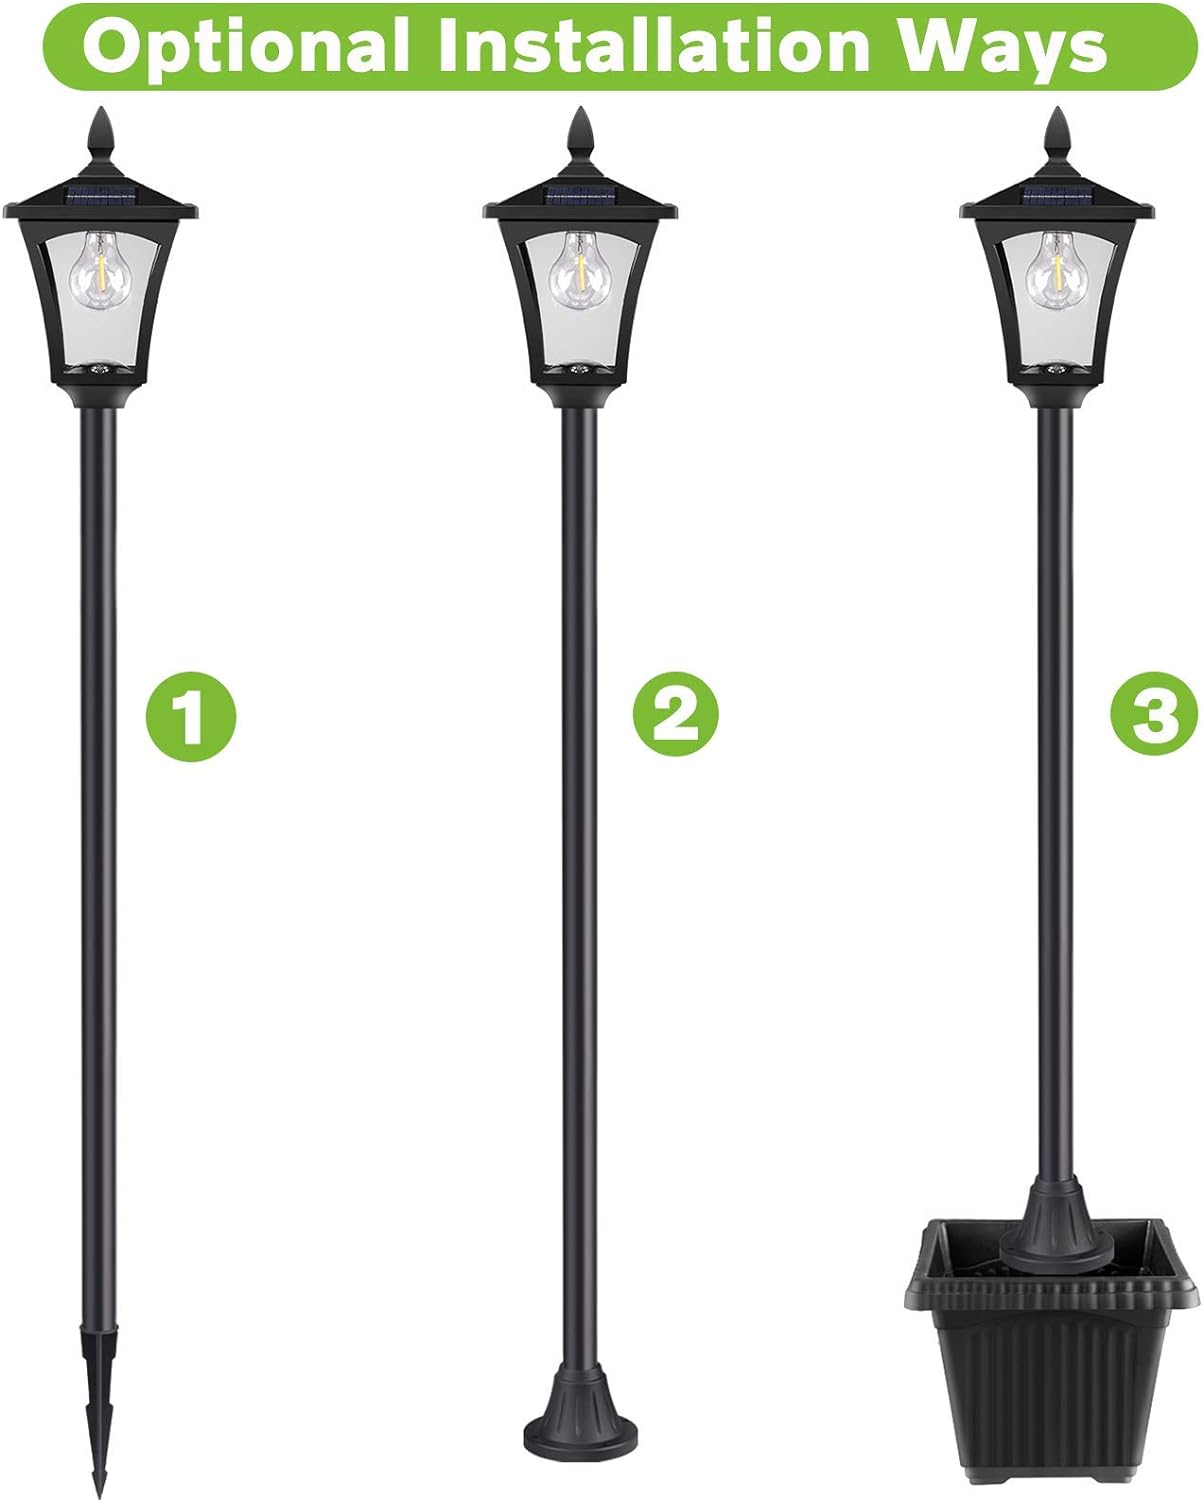 Solar Lamp Post Light Outdoor, How To Install Outdoor Solar Lamp Post